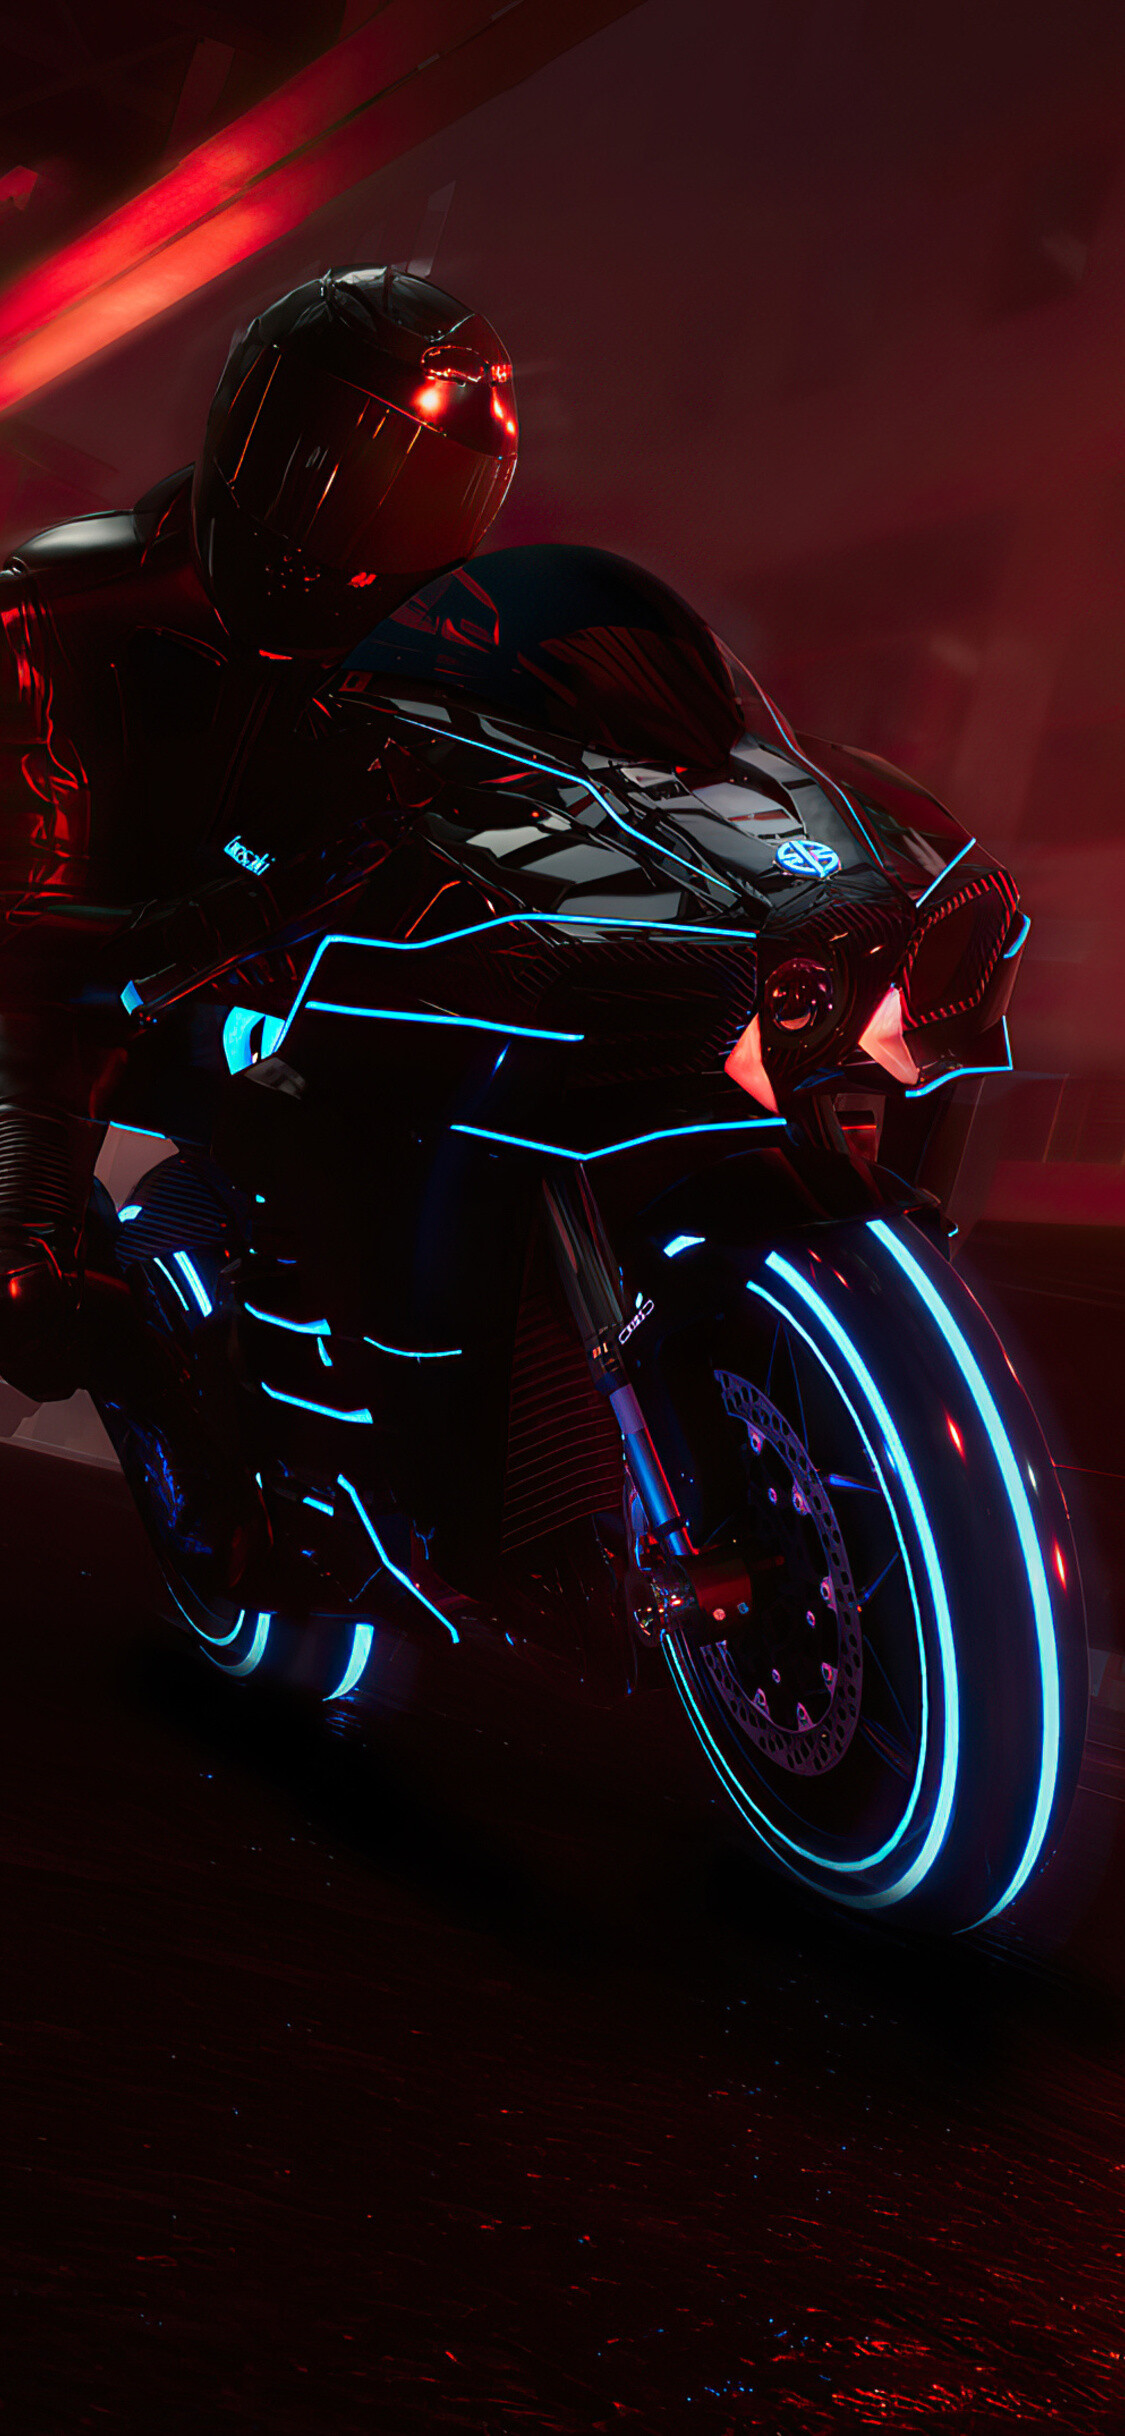 Kawasaki Ninja ZX: Japanese sport bike series, Name has been synonymous with sports motorcycles for over 30 years. 1130x2440 HD Background.